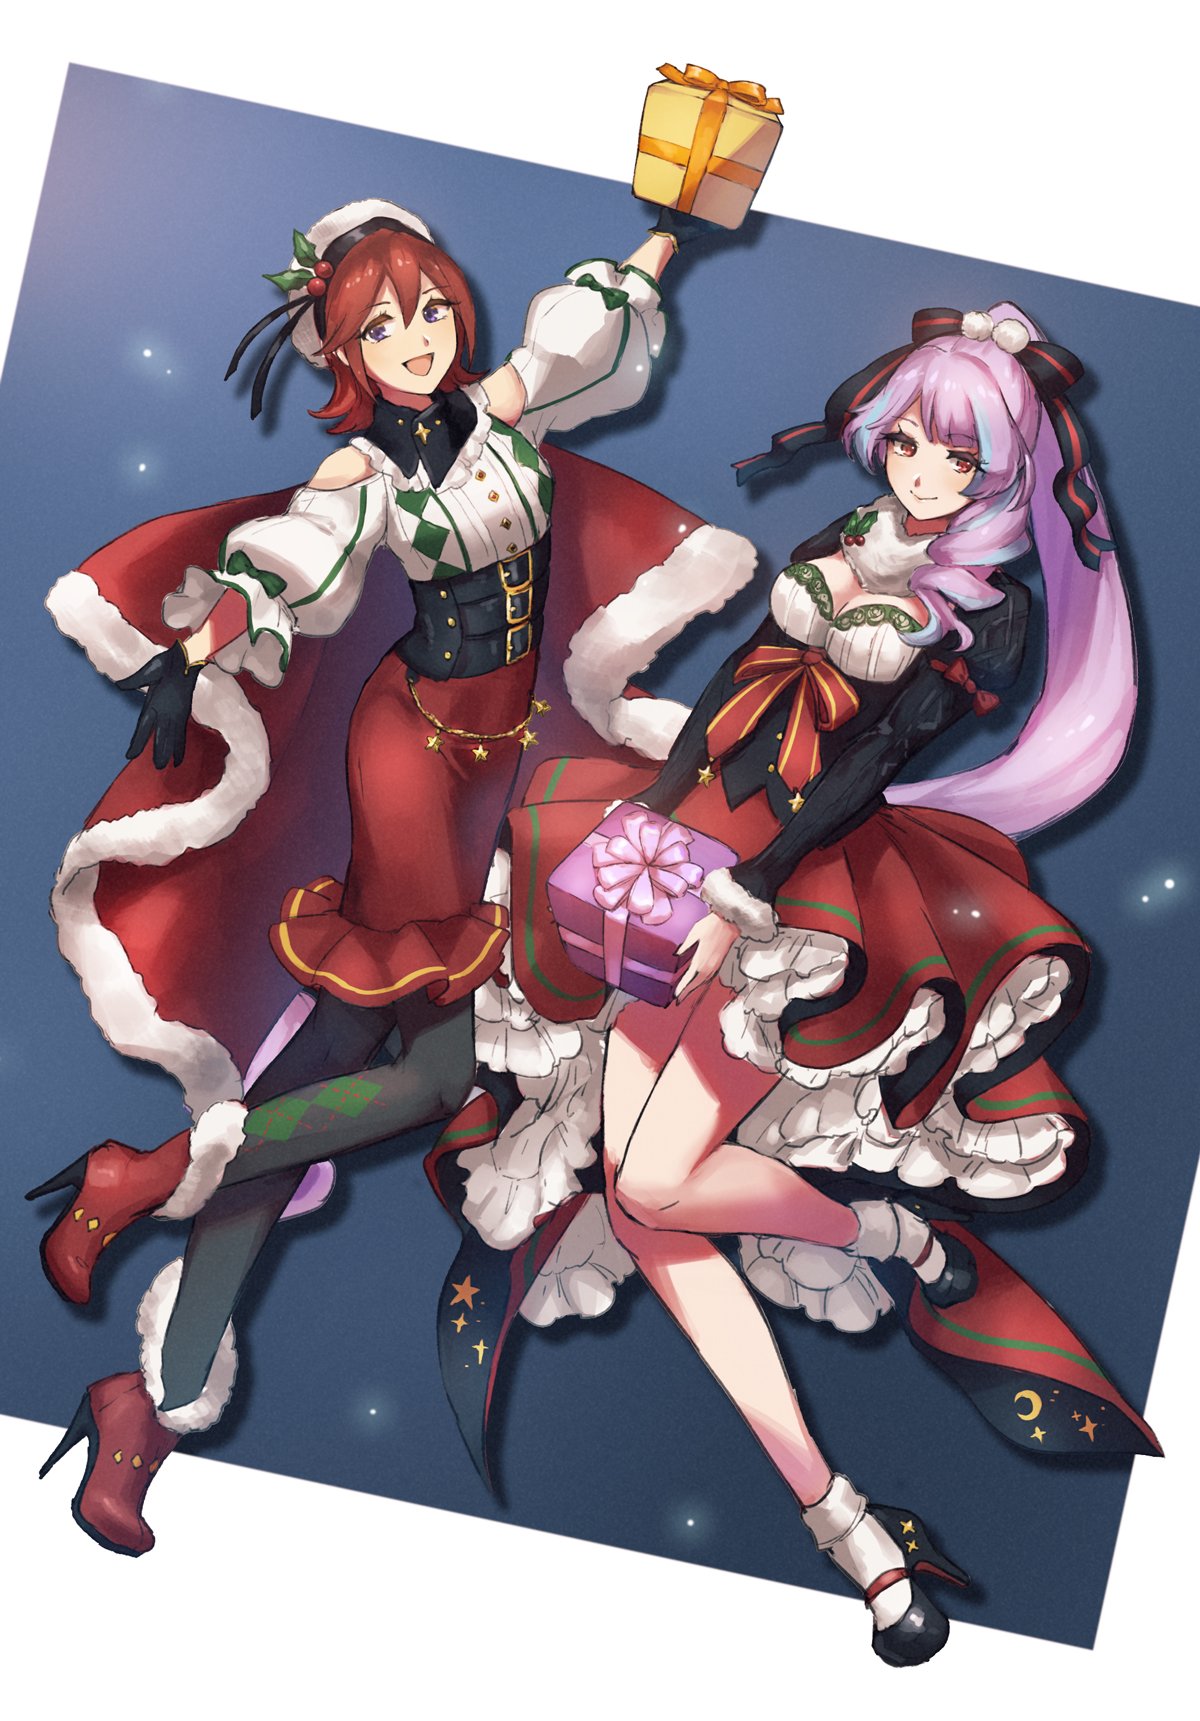 2girls :d black_gloves black_legwear blue_eyes boots box breasts choker cleavage corset eyebrows_visible_through_hair floating_hair full_body fur_boots gift gift_box gloves high_heel_boots high_heels high_ponytail highres holding holding_box kaname_buccaneer layered_skirt leg_up long_hair looking_at_viewer macross macross_delta medium_breasts mikumo_guynemer multiple_girls open_mouth outstretched_arms pantyhose pencil_skirt protected_link purple_hair red_eyes red_footwear red_hair red_skirt scarf shimatani_azu shirt short_hair shoulder_cutout skirt smile socks very_long_hair white_hair white_legwear white_shirt